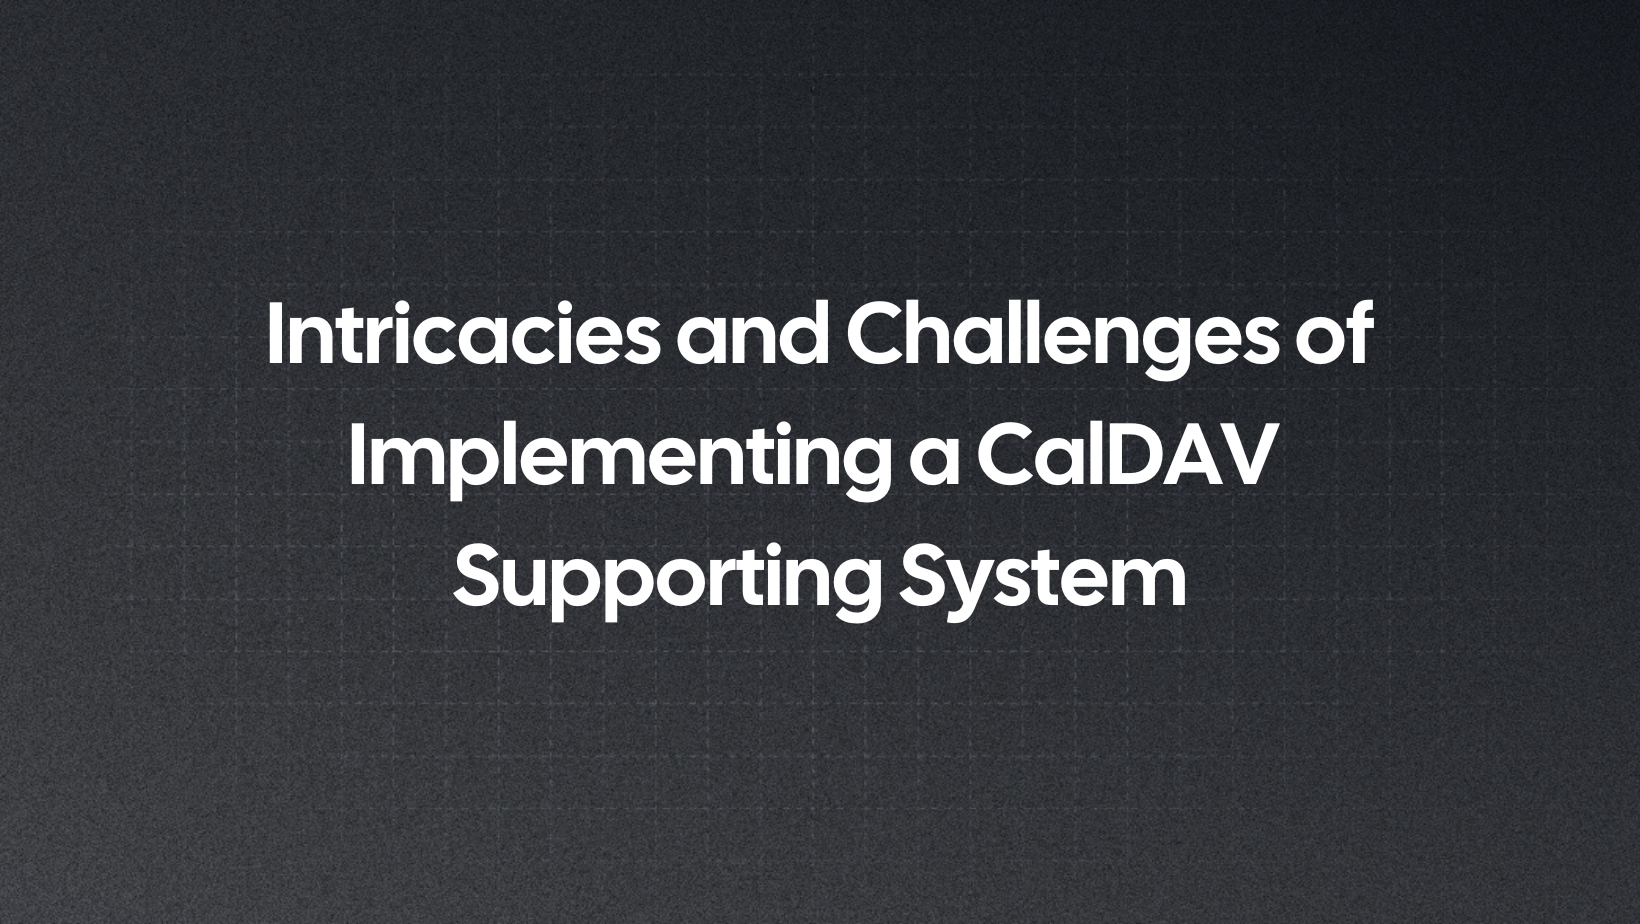 The Intricacies and Challenges of Implementing a CalDAV Supporting System for Cal.com